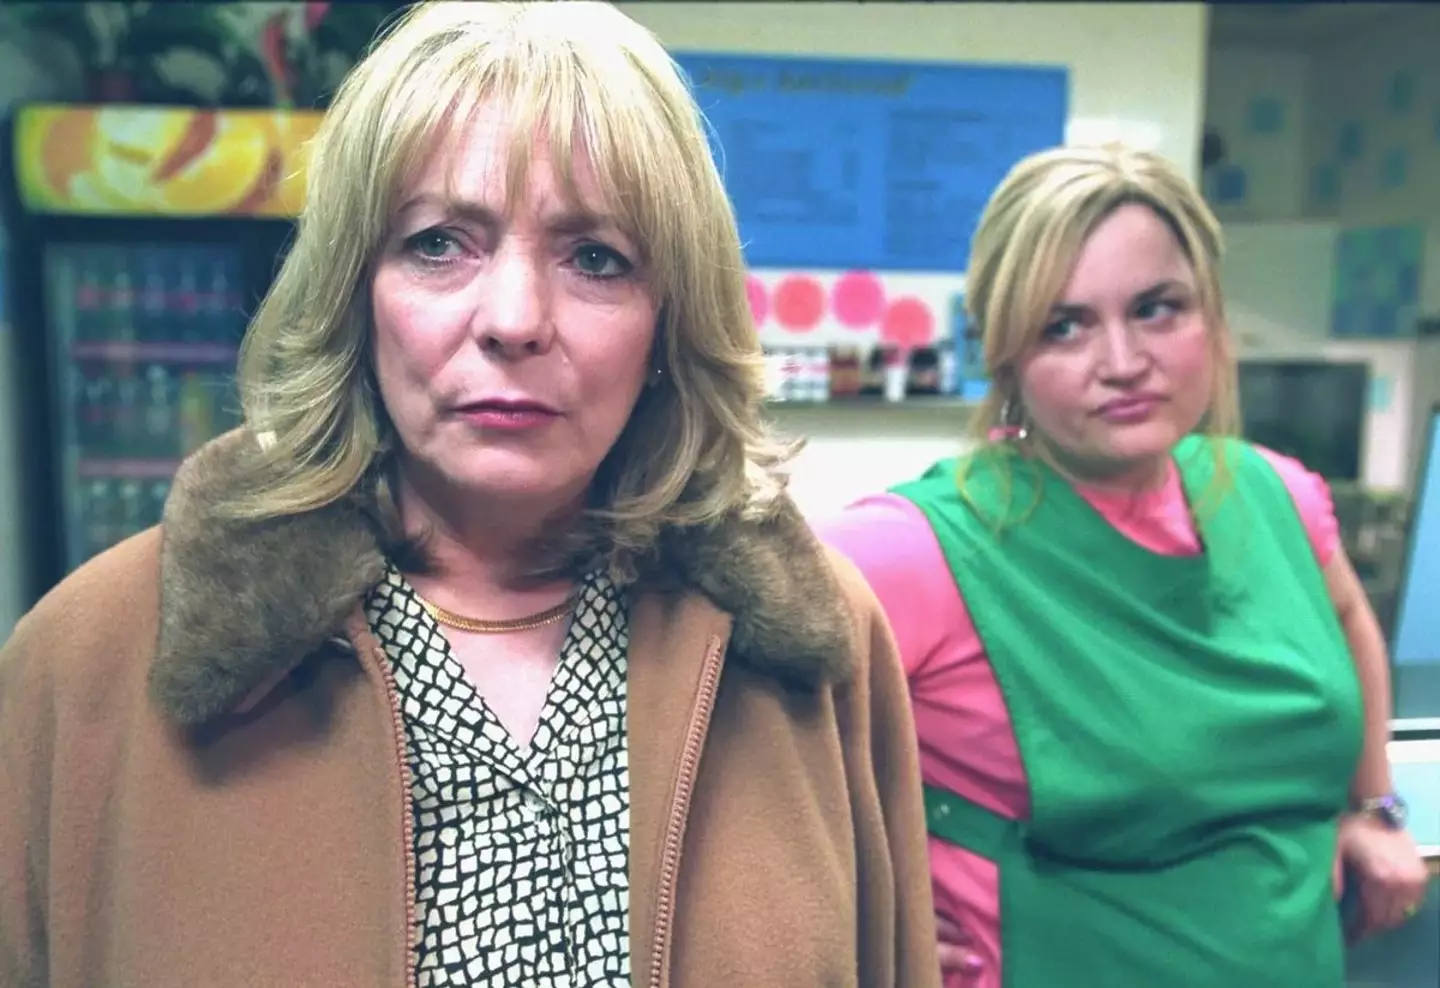 Gavin and Stacey stars Alison Steadman and Ruth Jones also joined the cast of Fat Friends.